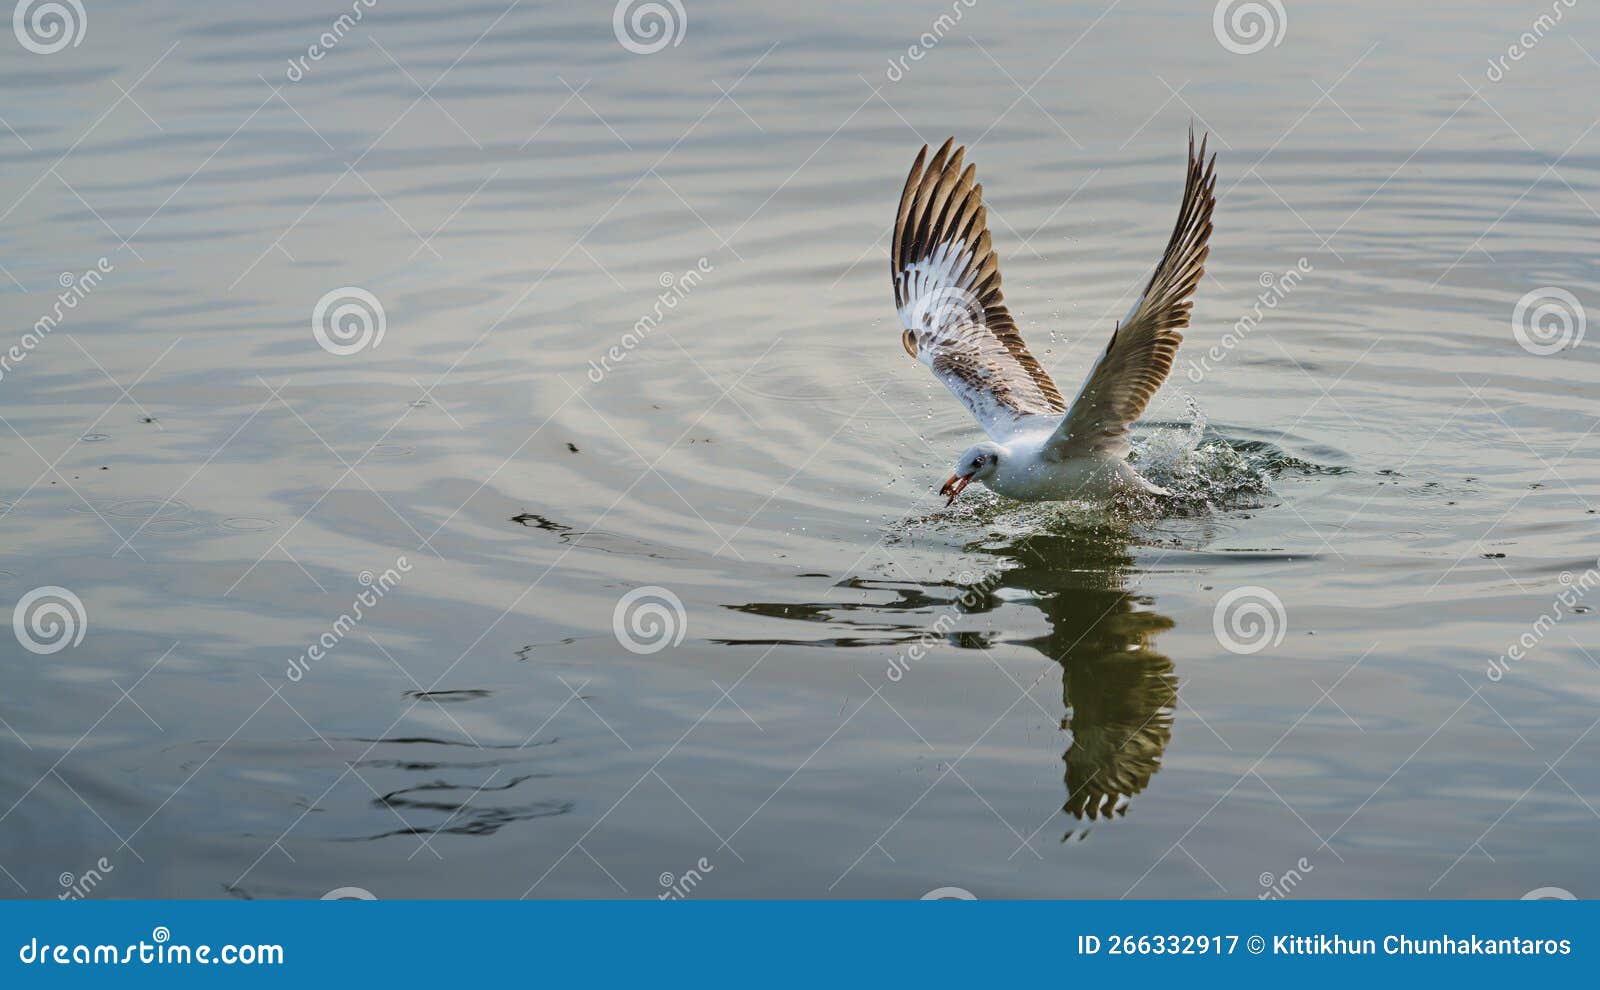 wildlife of larus charadriiformes or white seagull hunting on a sea, flies over the water has food in its beak and eating.